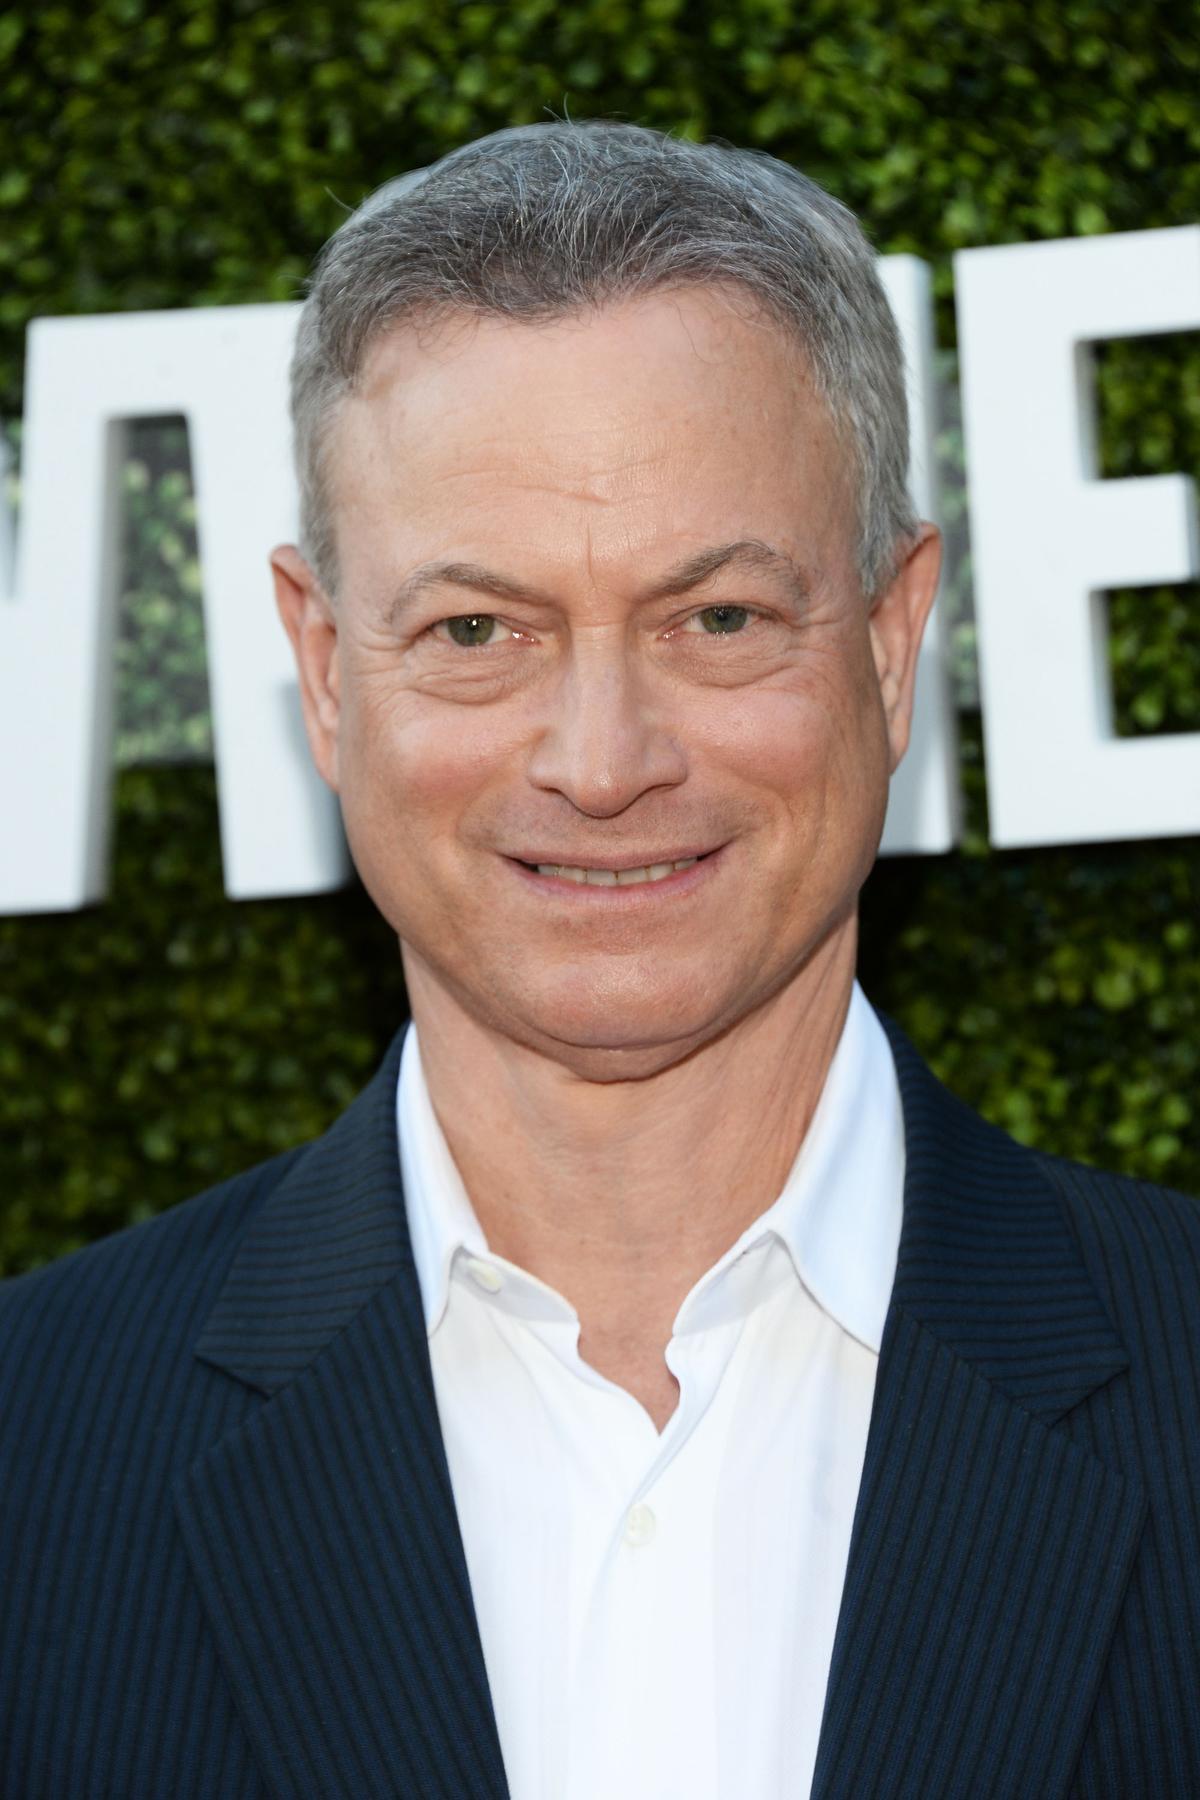 Gary Sinise at the CBS, CW, & Showtime Summer TCA Party at Pacific Design Center in West Hollywood, California, on Aug. 10, 2016 (©Getty Images | <a href="https://www.gettyimages.com/detail/news-photo/actor-gary-sinise-arrives-at-the-cbs-cw-showtime-summer-tca-news-photo/588336648?adppopup=true">Matt Winkelmeyer</a>)